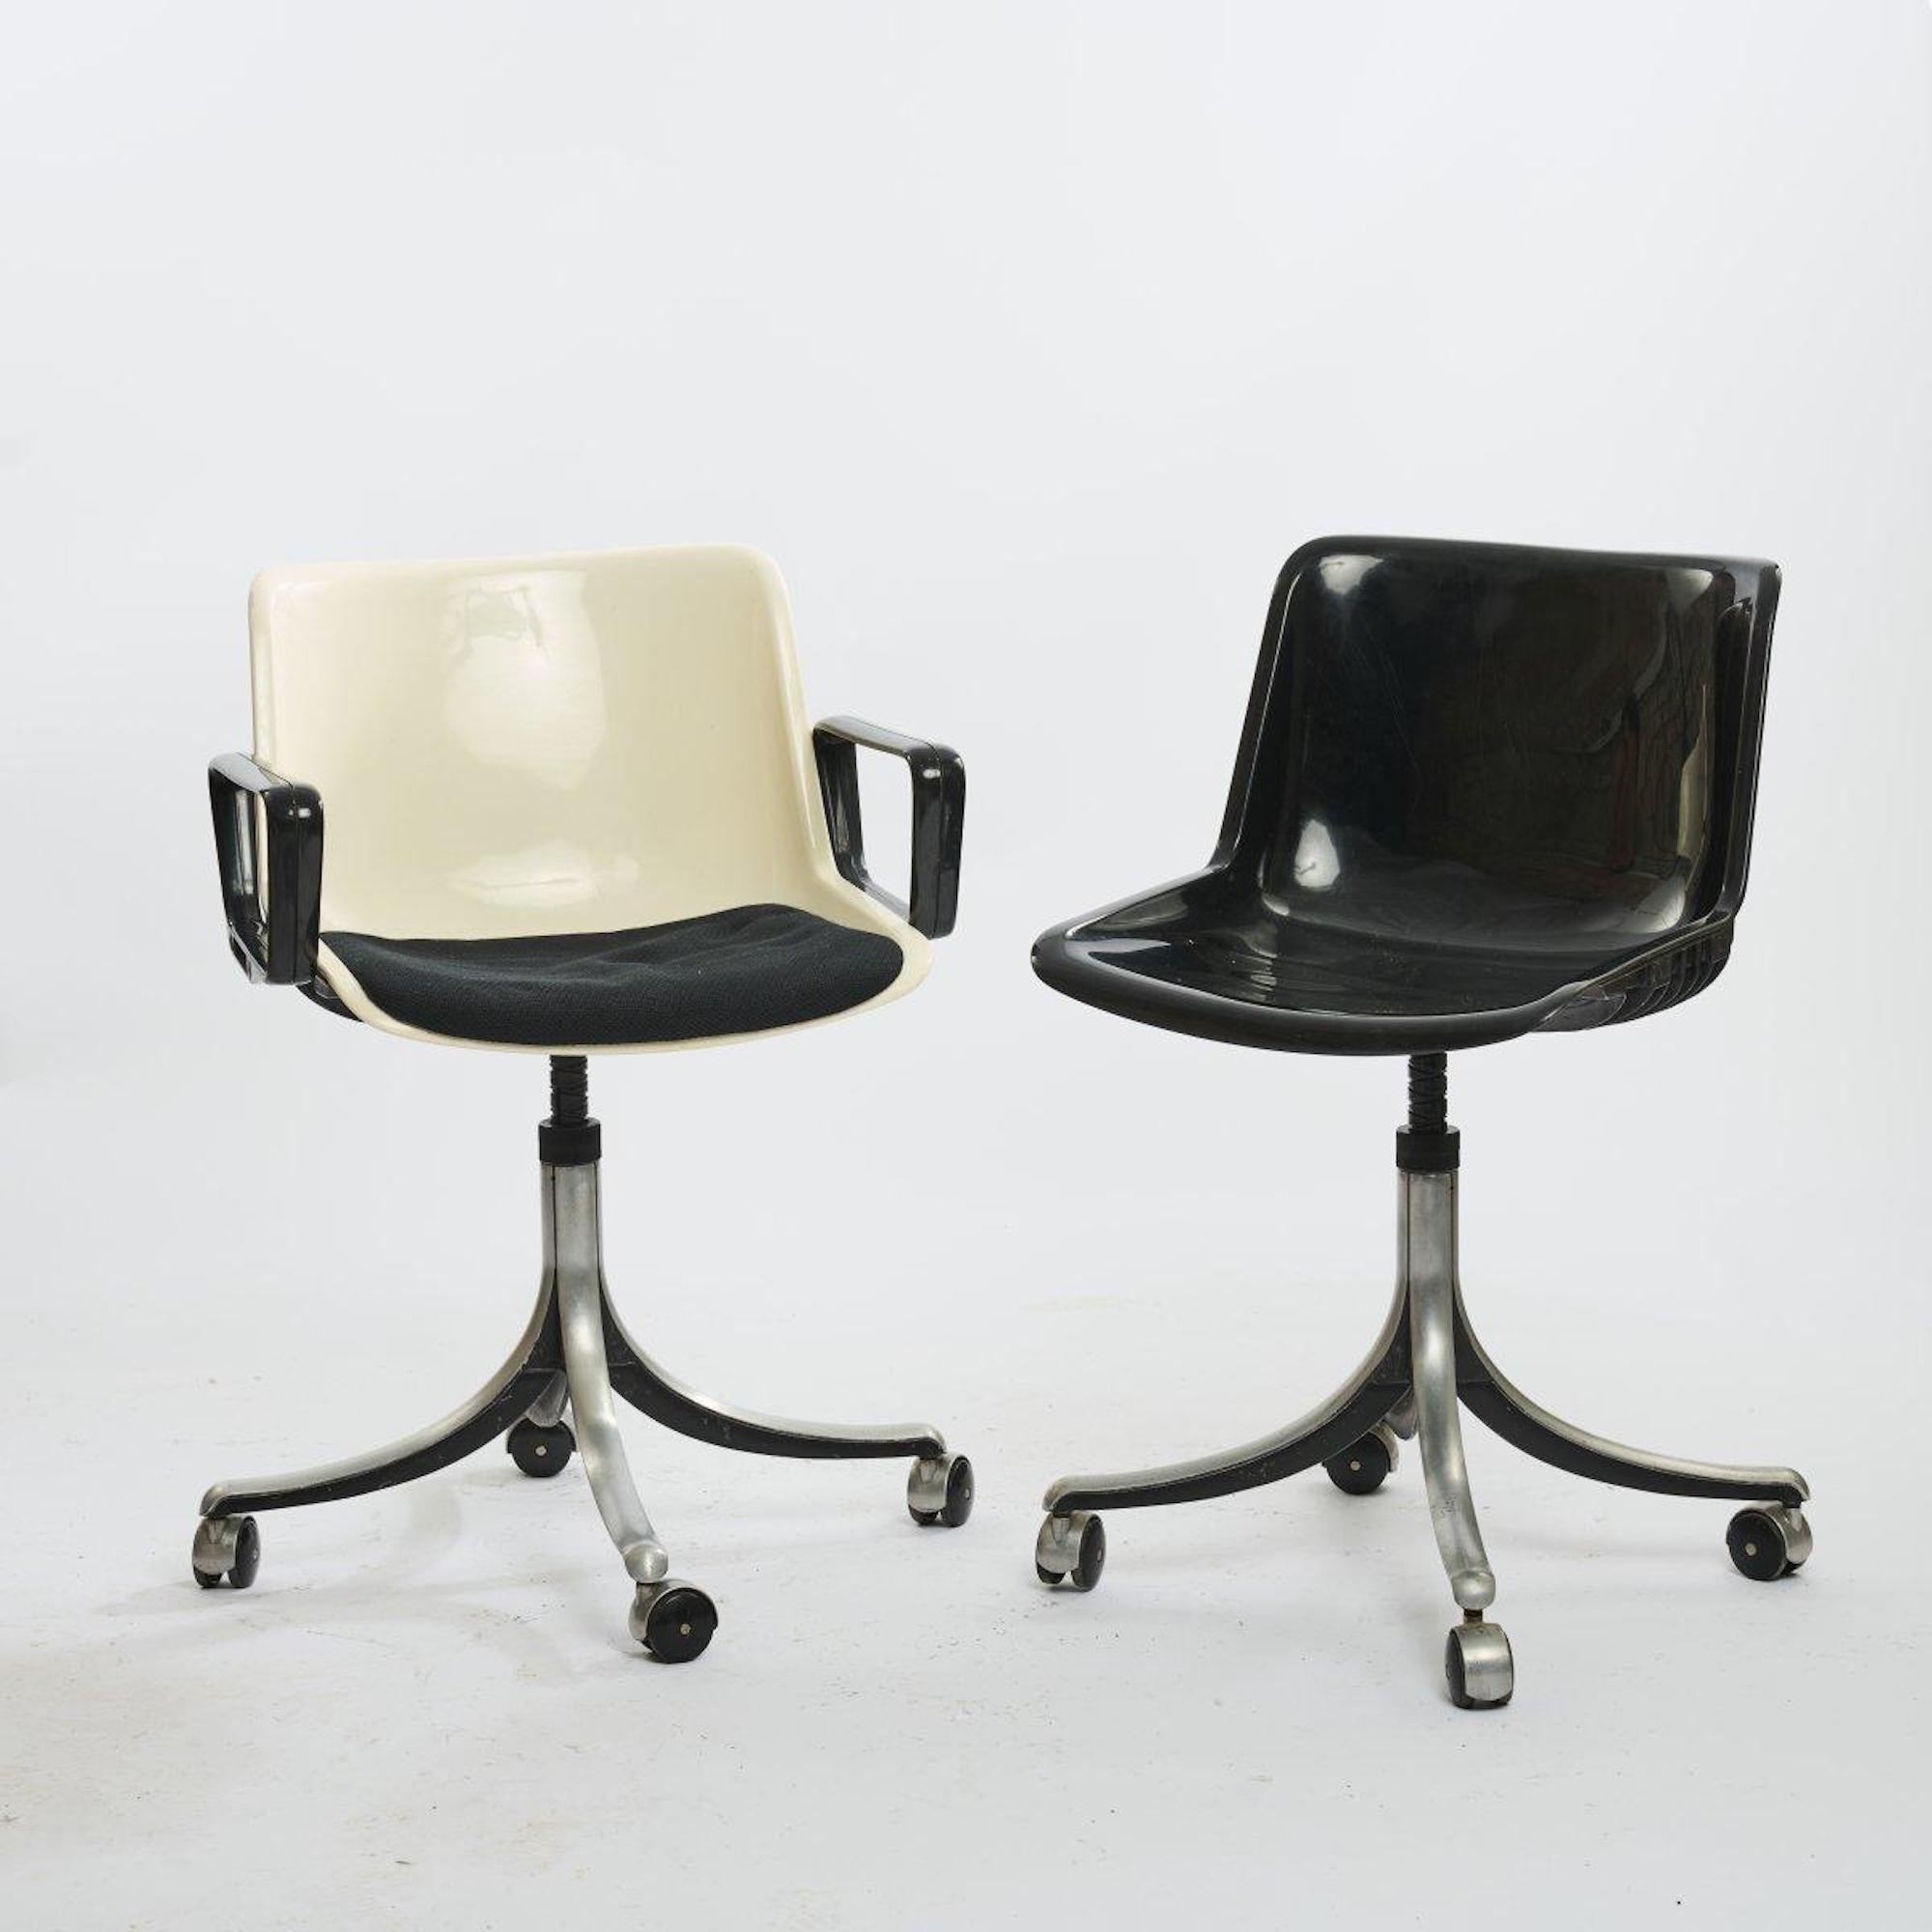 Four Modus Work Chairs by Centro Progetti Tecno, 1972. For Sale 2